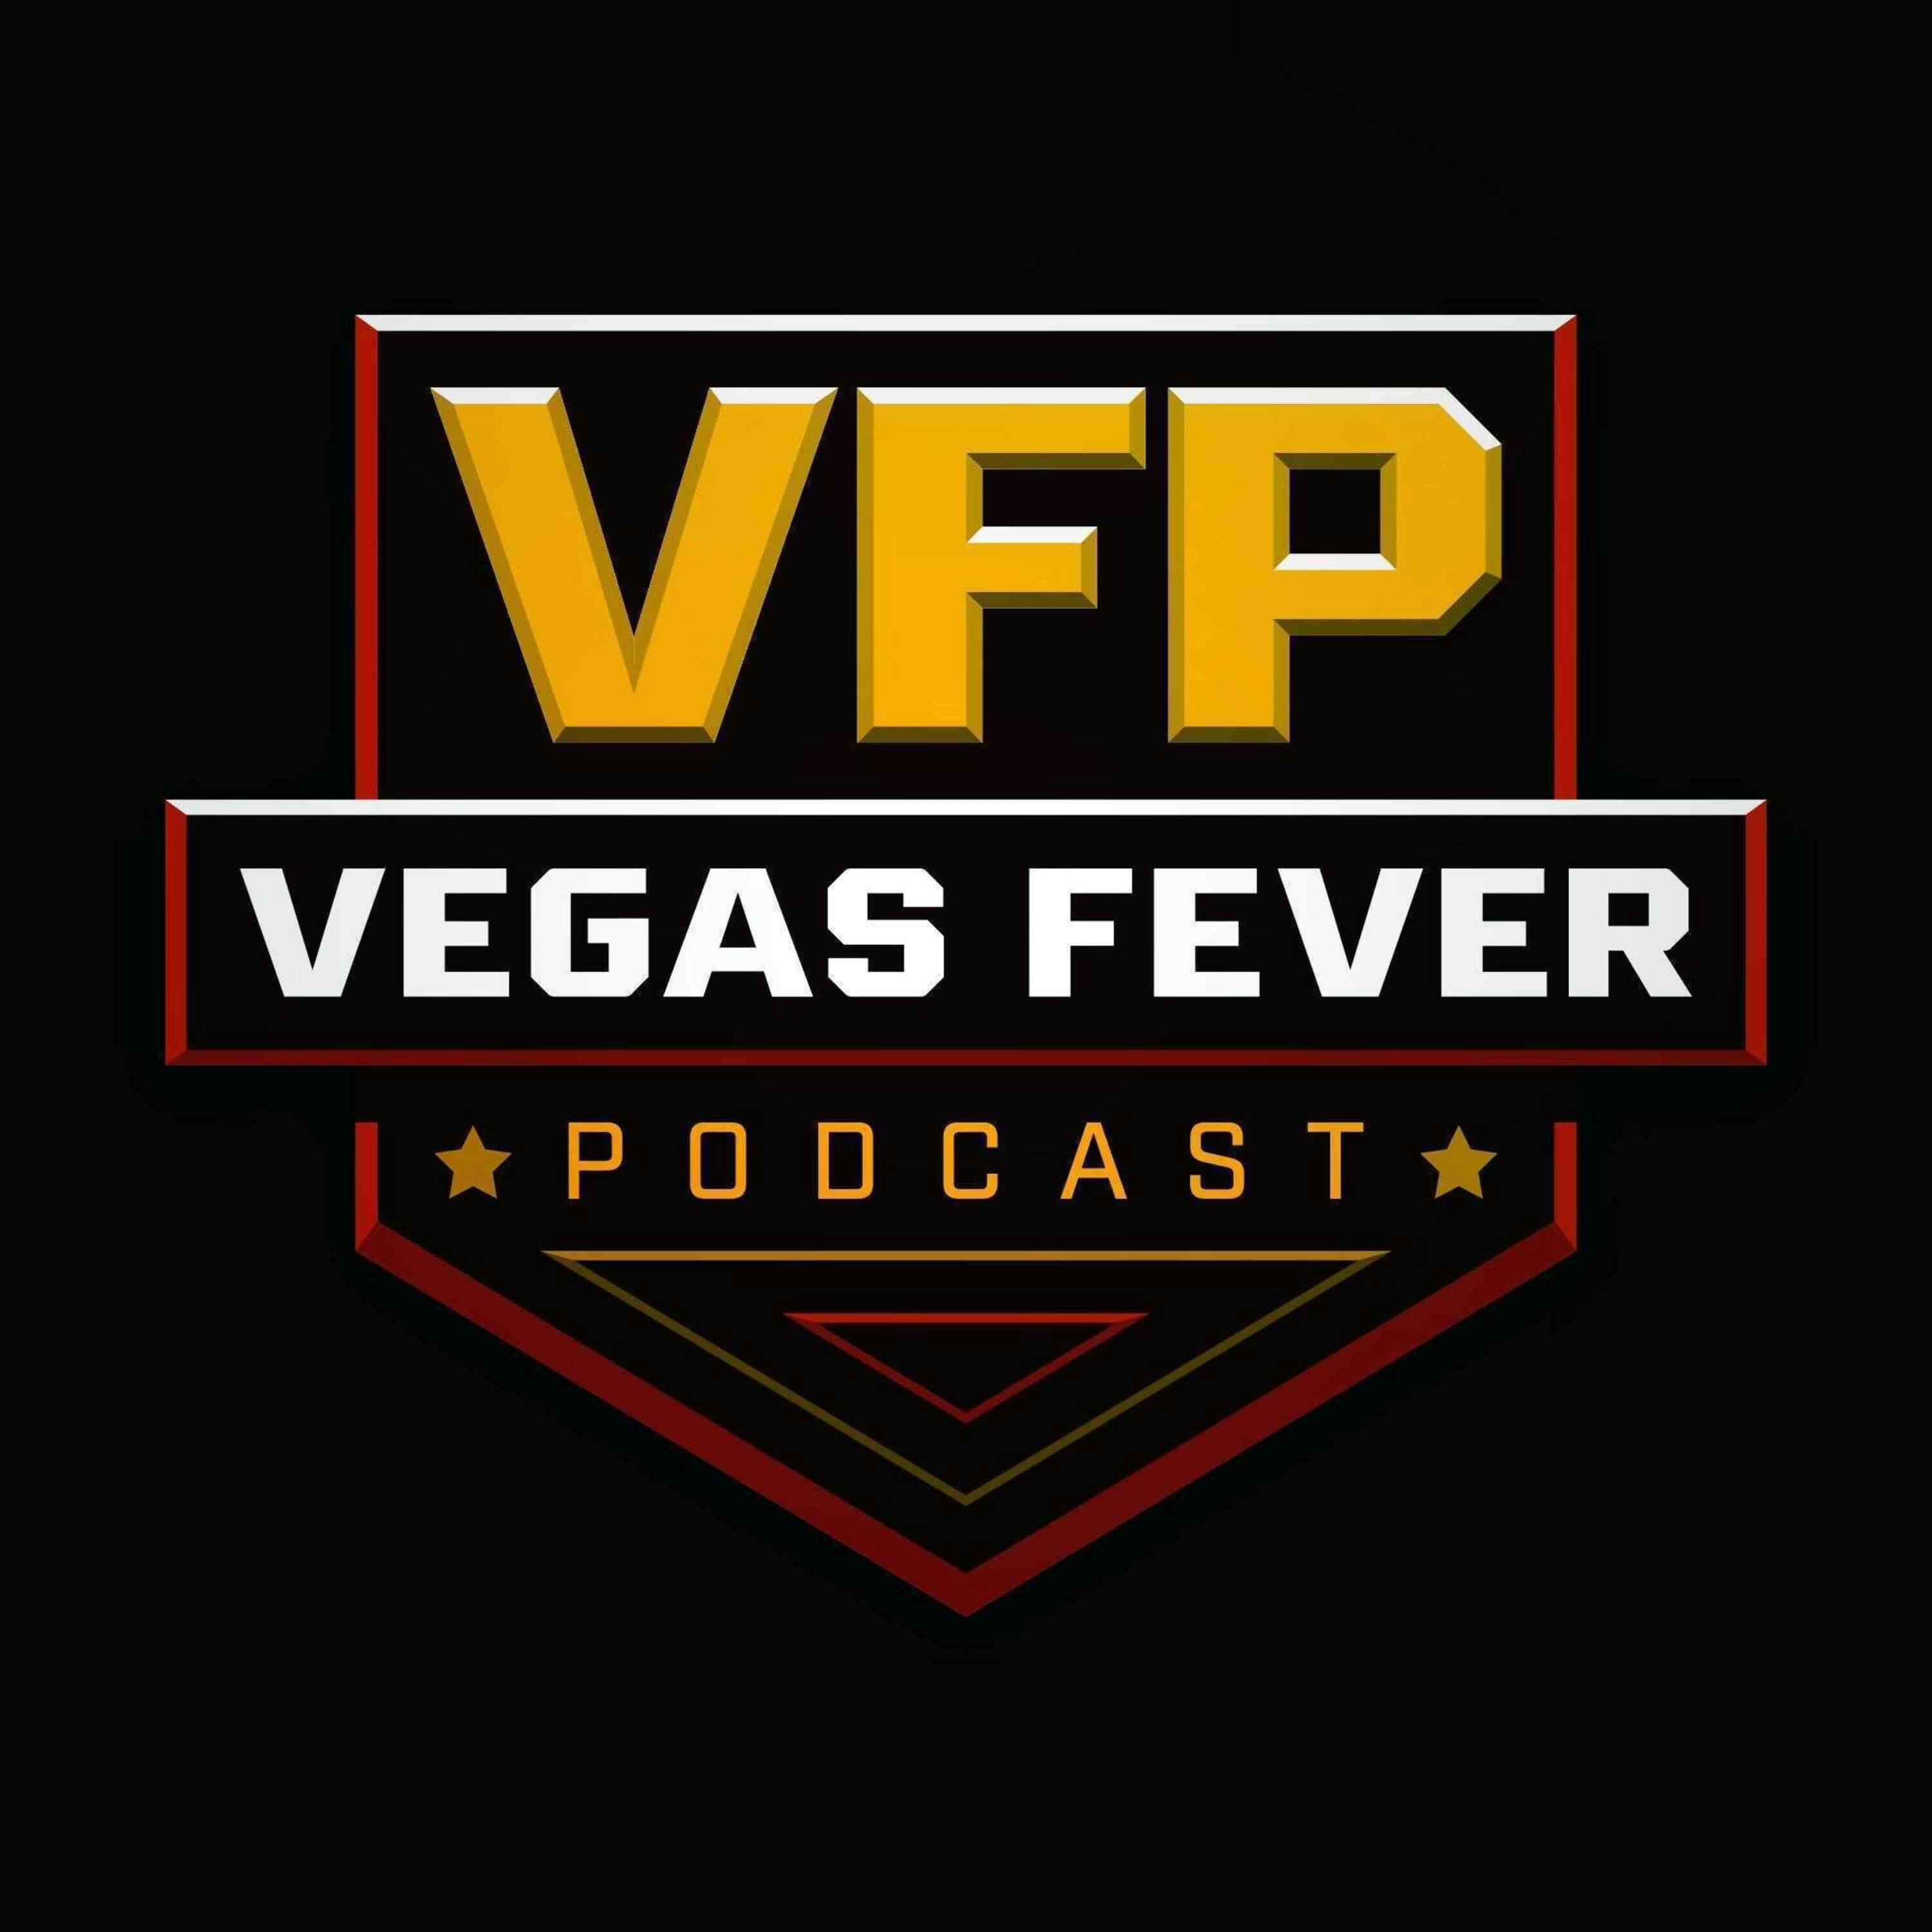 The Vegas teams are all of to a great start! We talk about them in this latest episode.